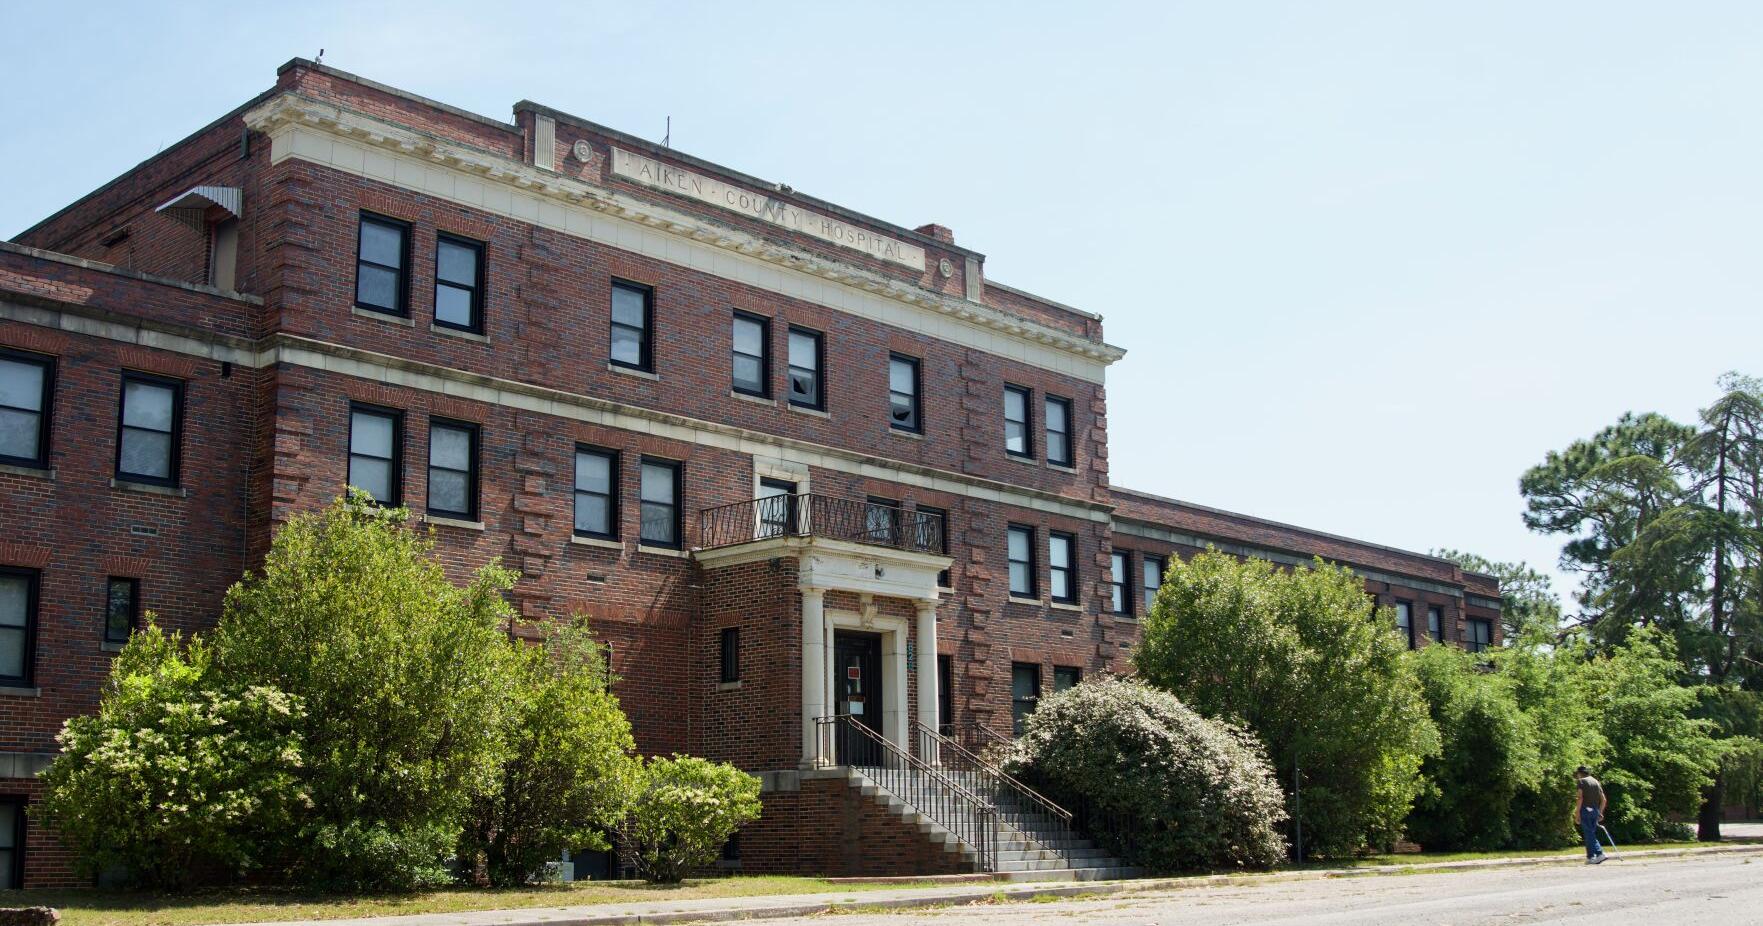 No bids received for old Aiken County Hospital